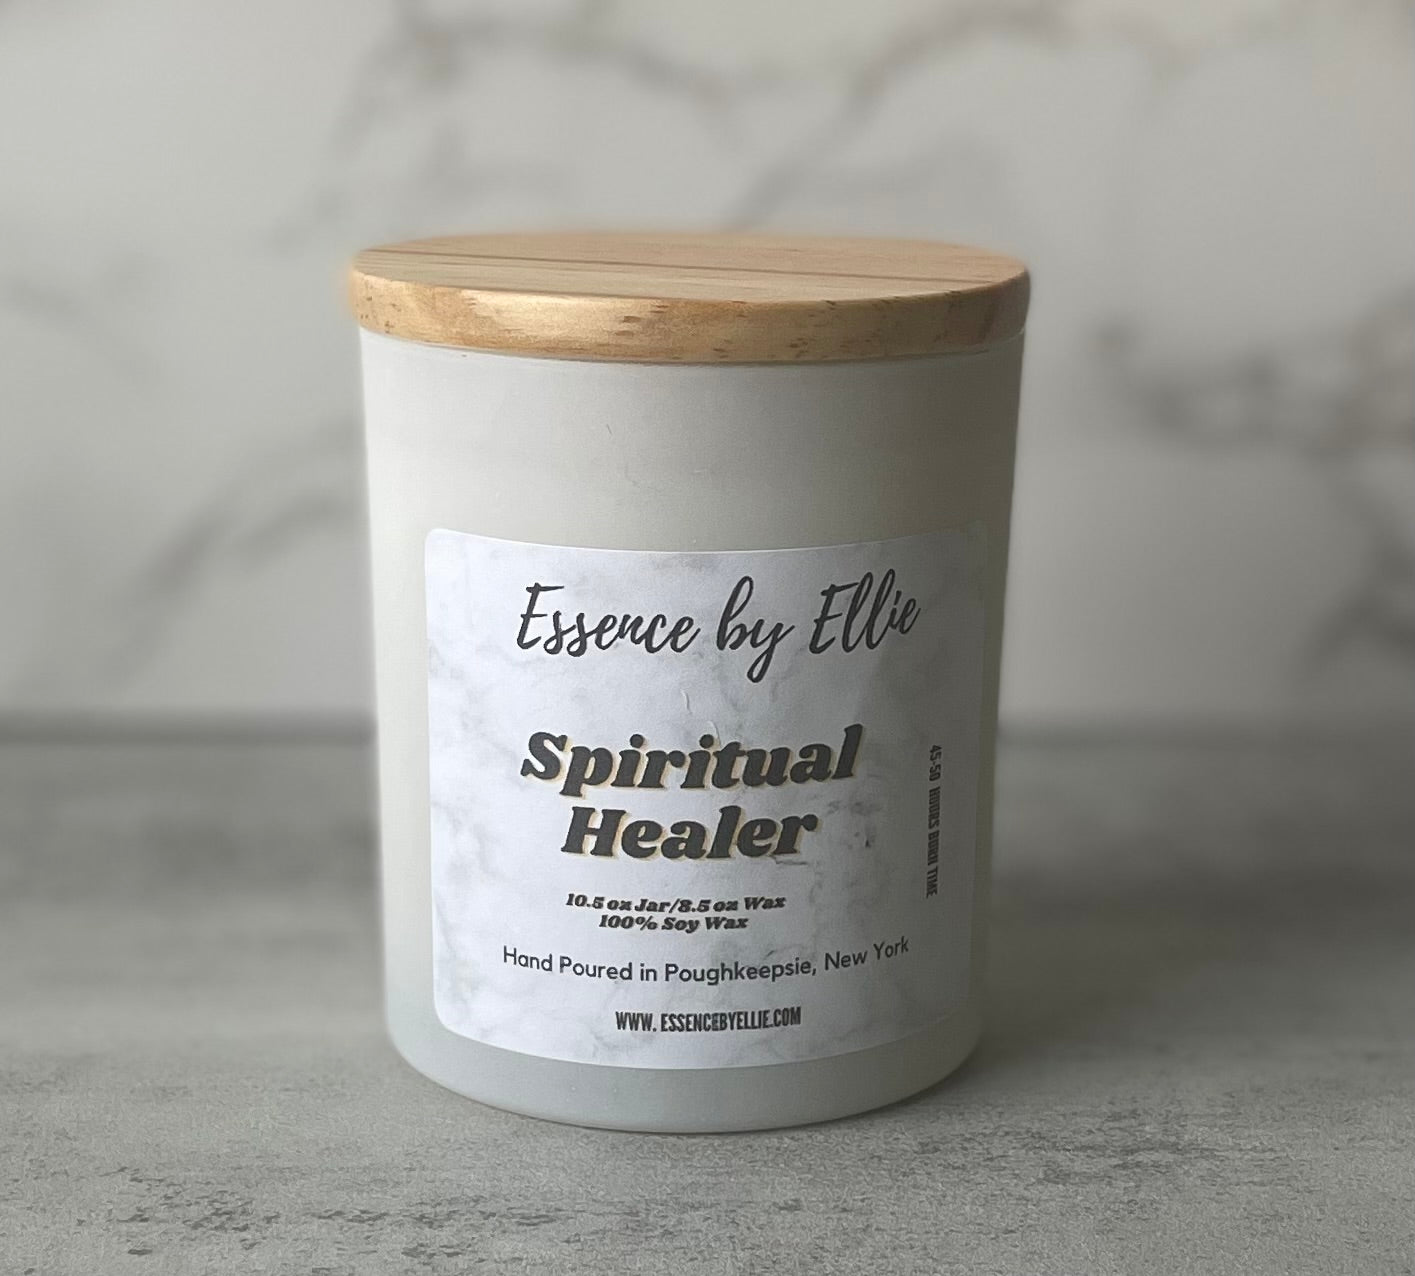 Spiritual healer candle has exotic woodsy notes this wooden wick candle is perfect for any occasion. 